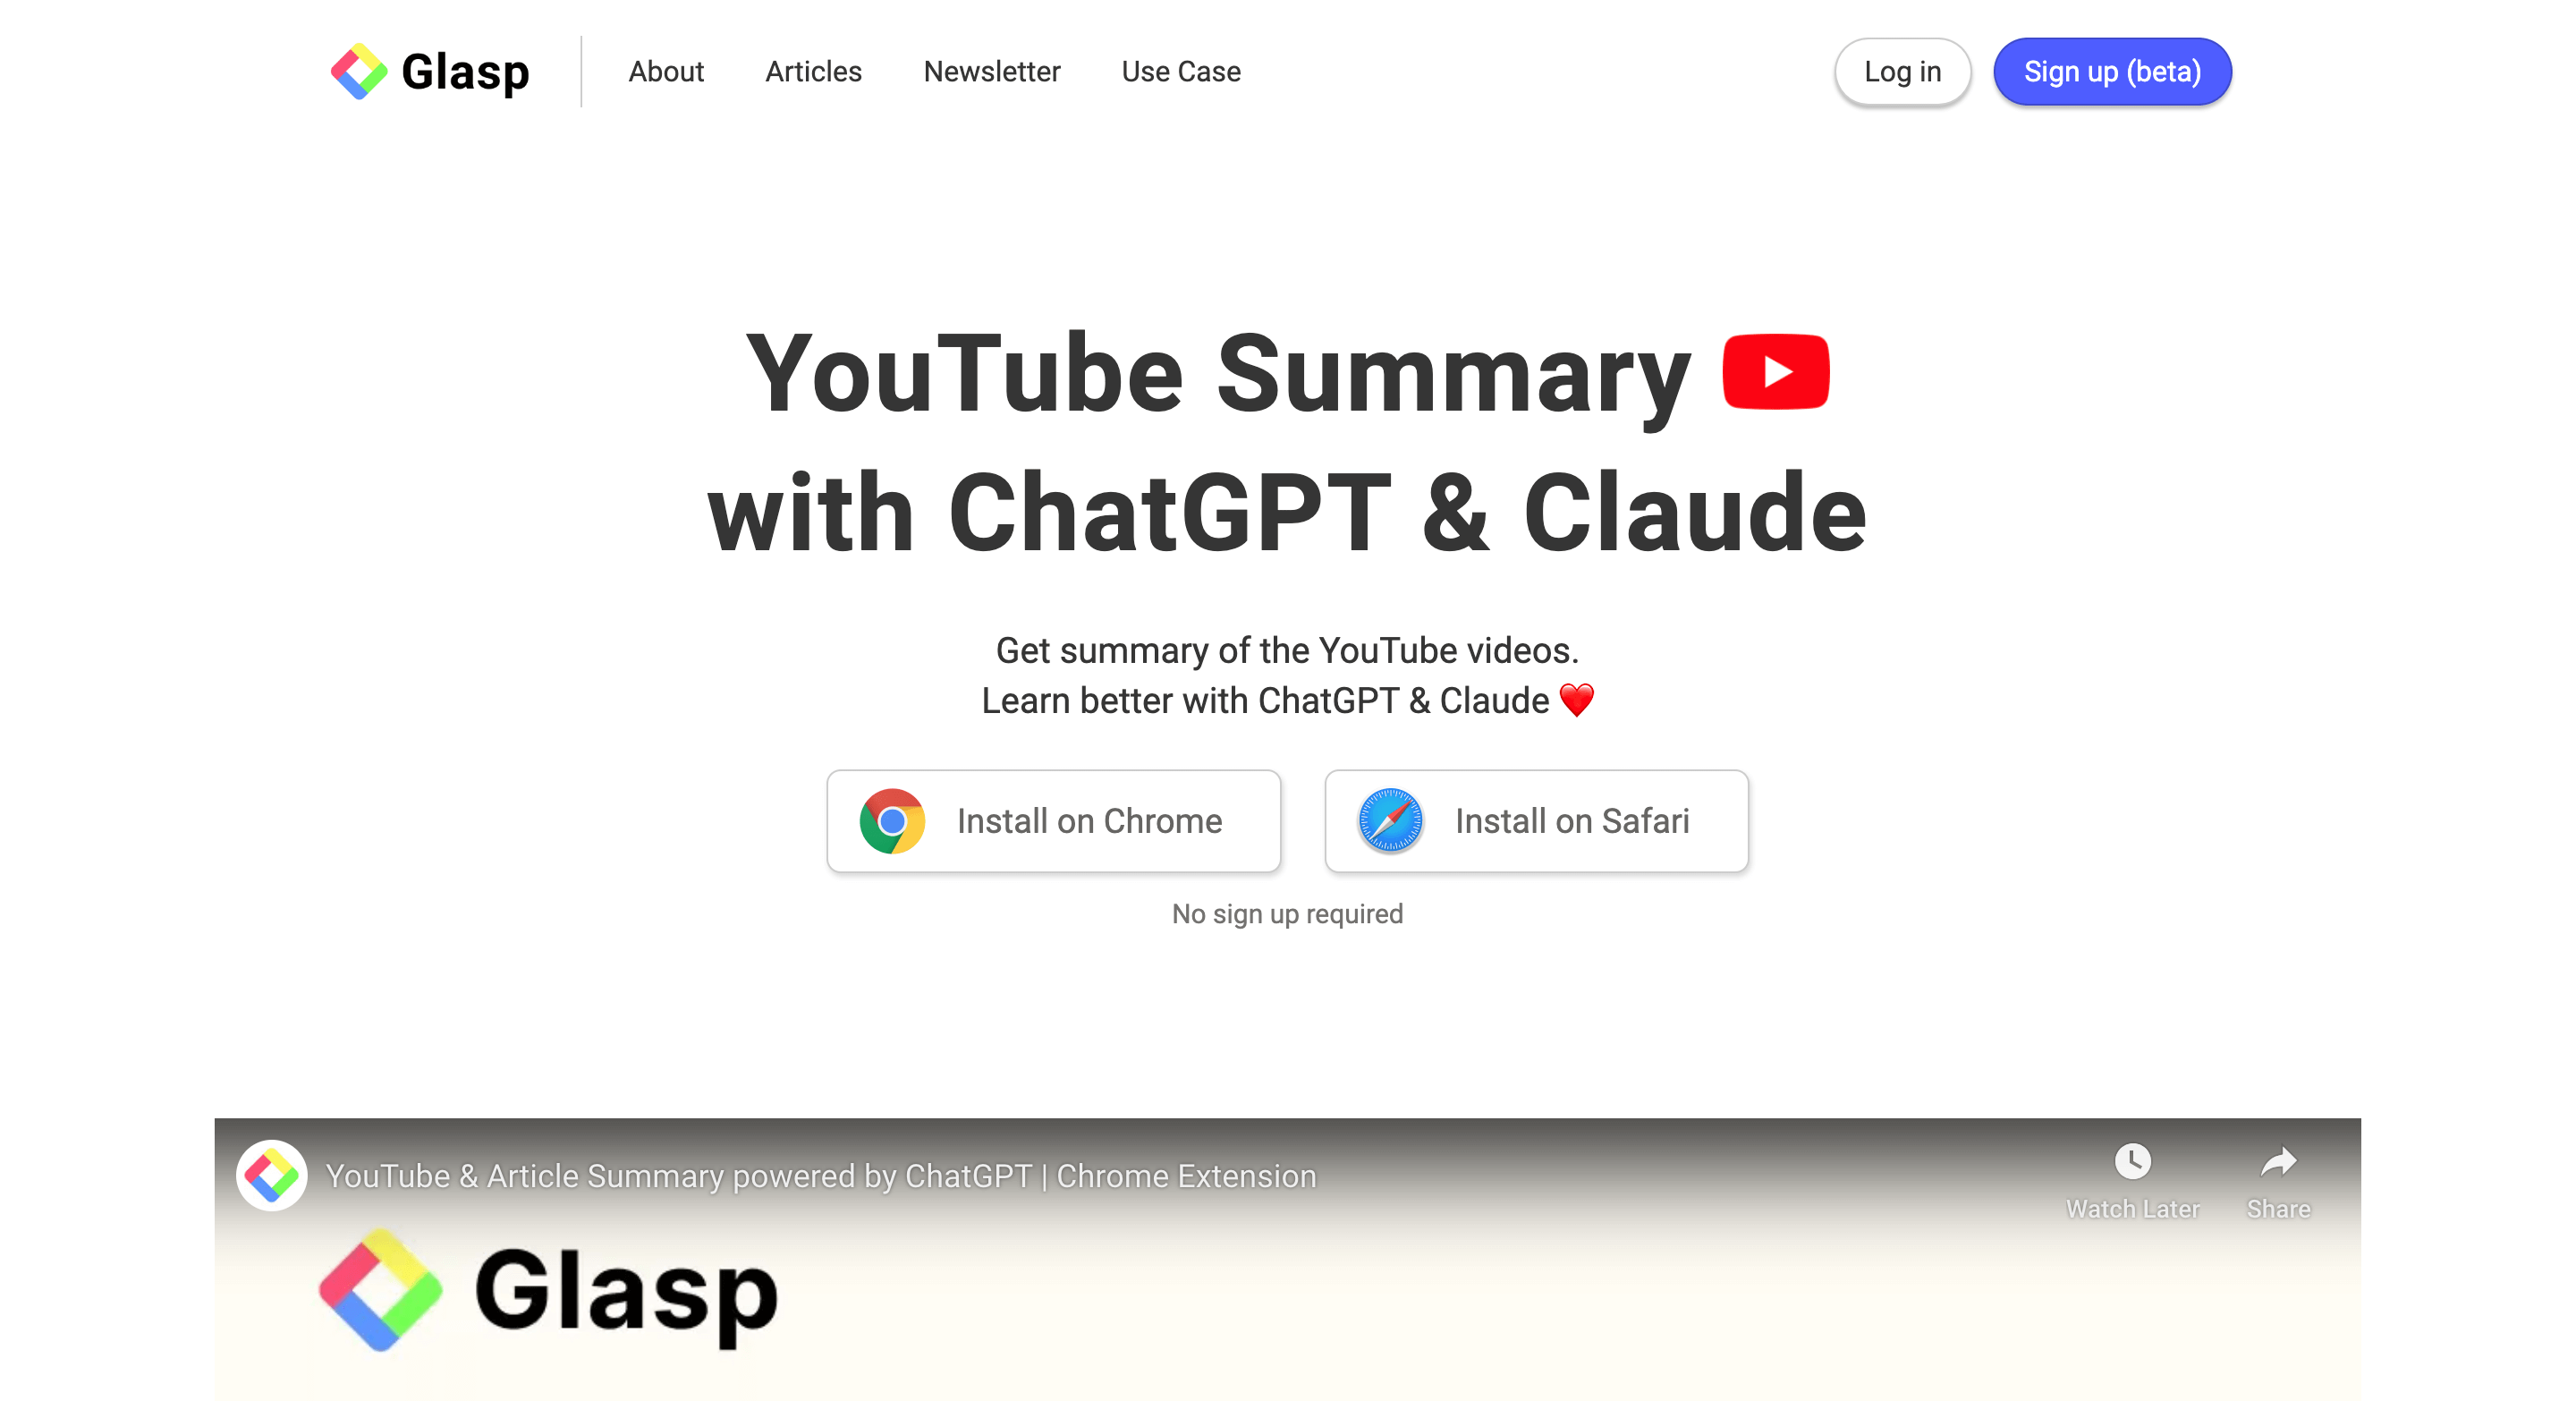 Summary of YouTube with ChatGPT